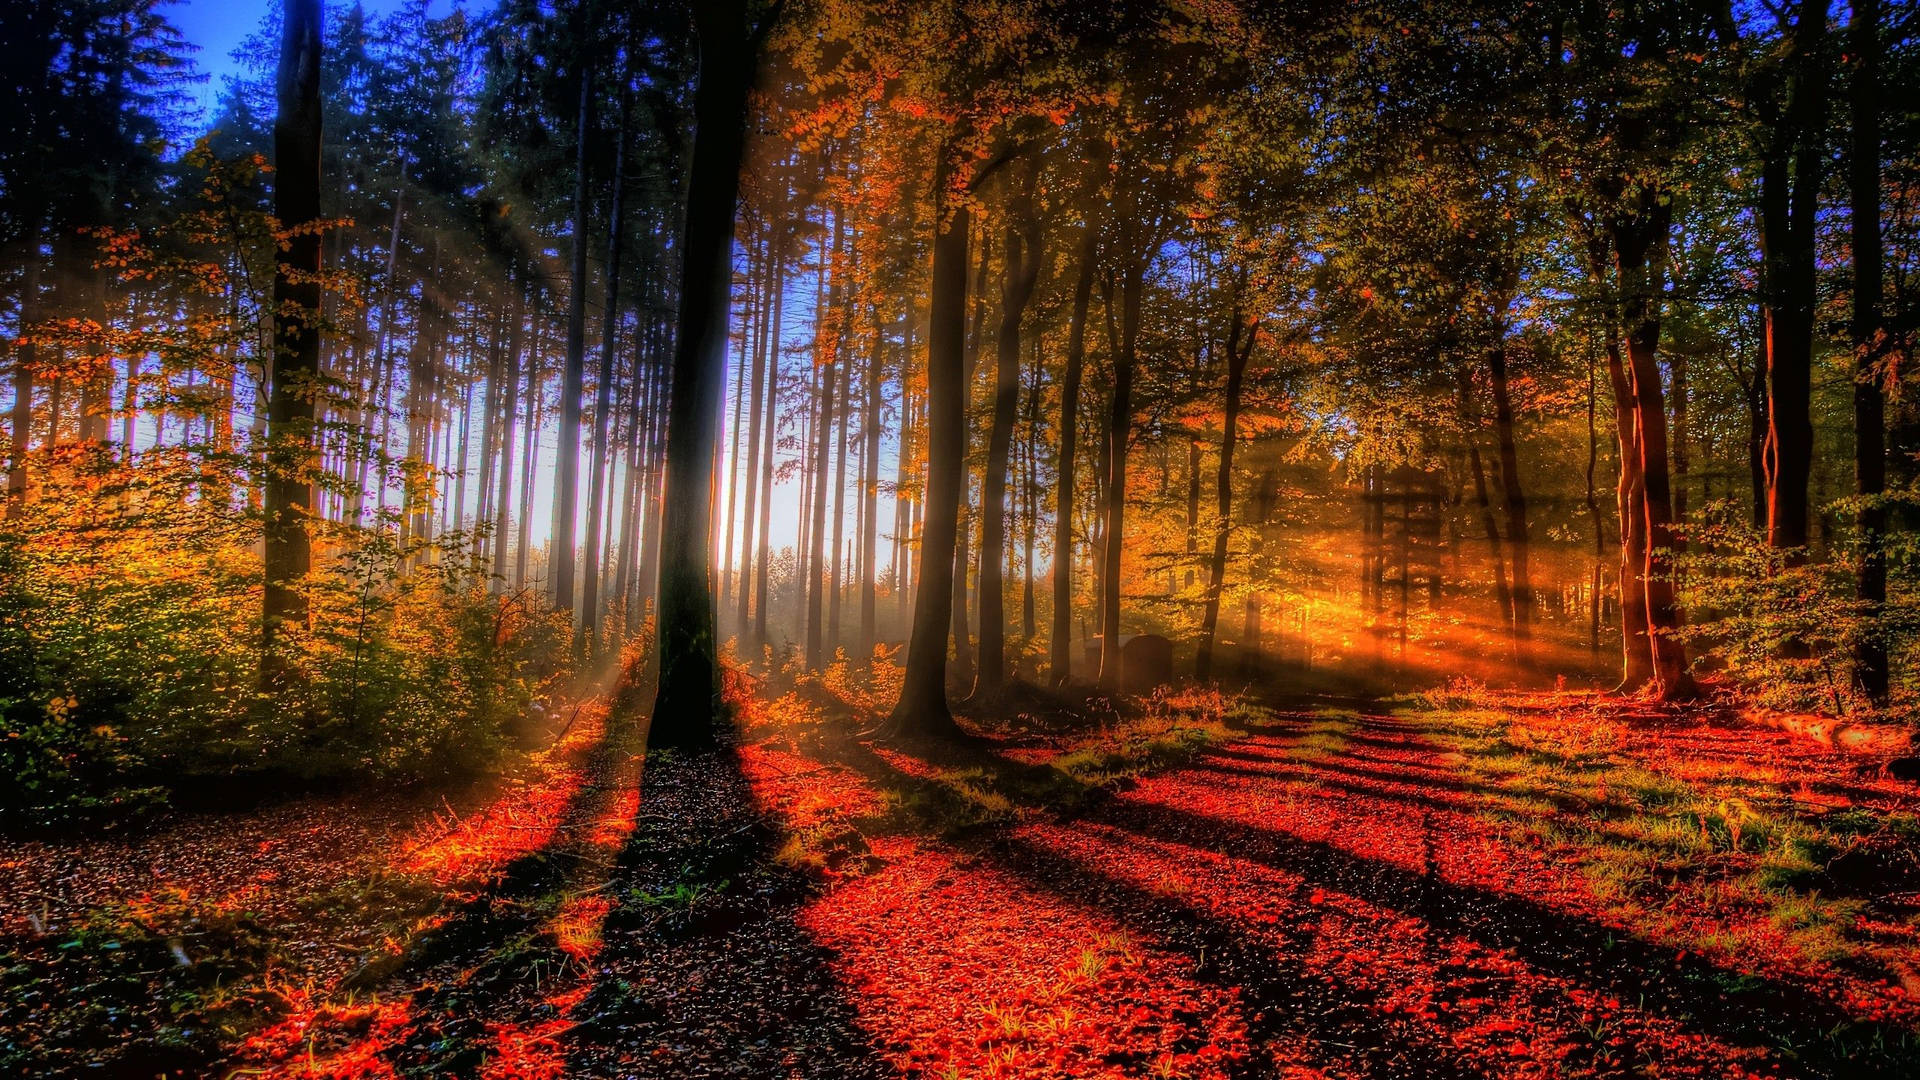 Enthralling Fall Season In 2560x1440 Resolution Background